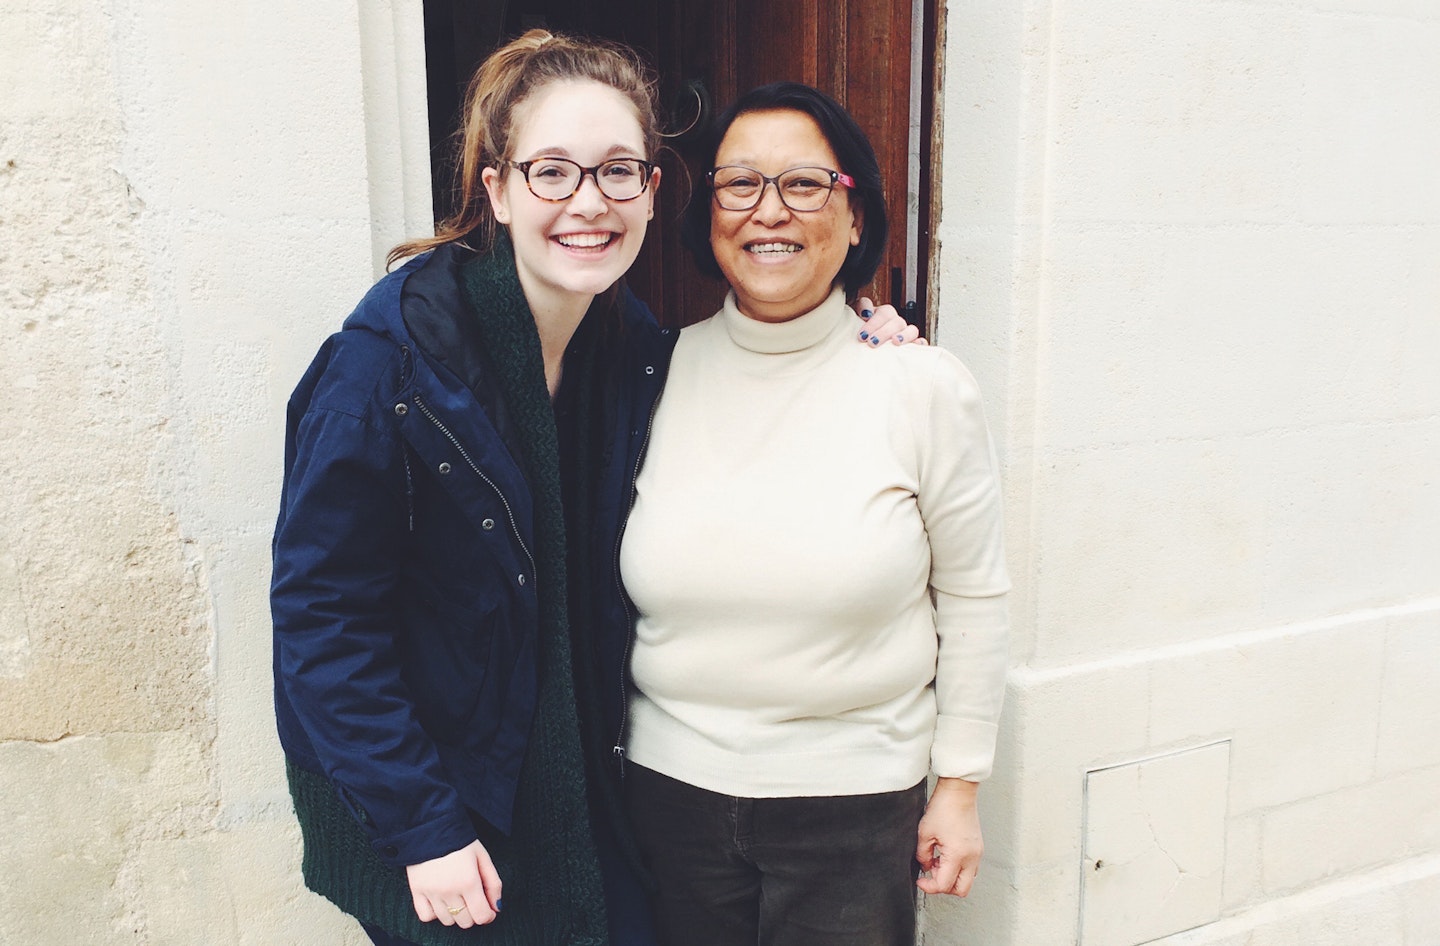 Me with my host mother Nelly in Bordeaux, May 2015. I graduated early from high school to study French at the Alliance Francaise for a semester. Courtesy of Aisling Henihan.